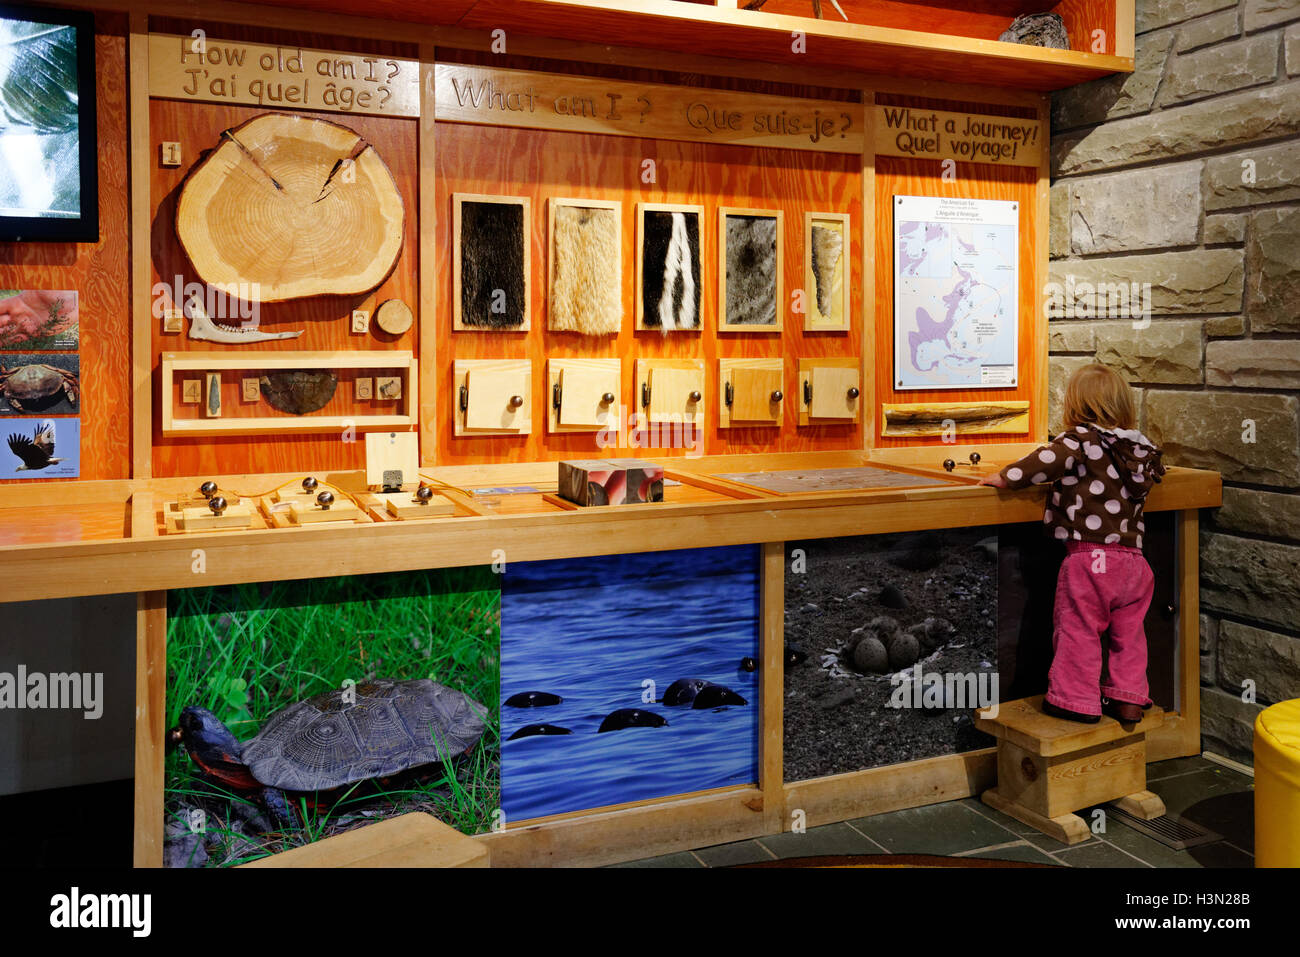 A little girl looking at the interactive museum exhibits in Kouchibouguac National Park visitors centre, New Brunswick Canada Stock Photo